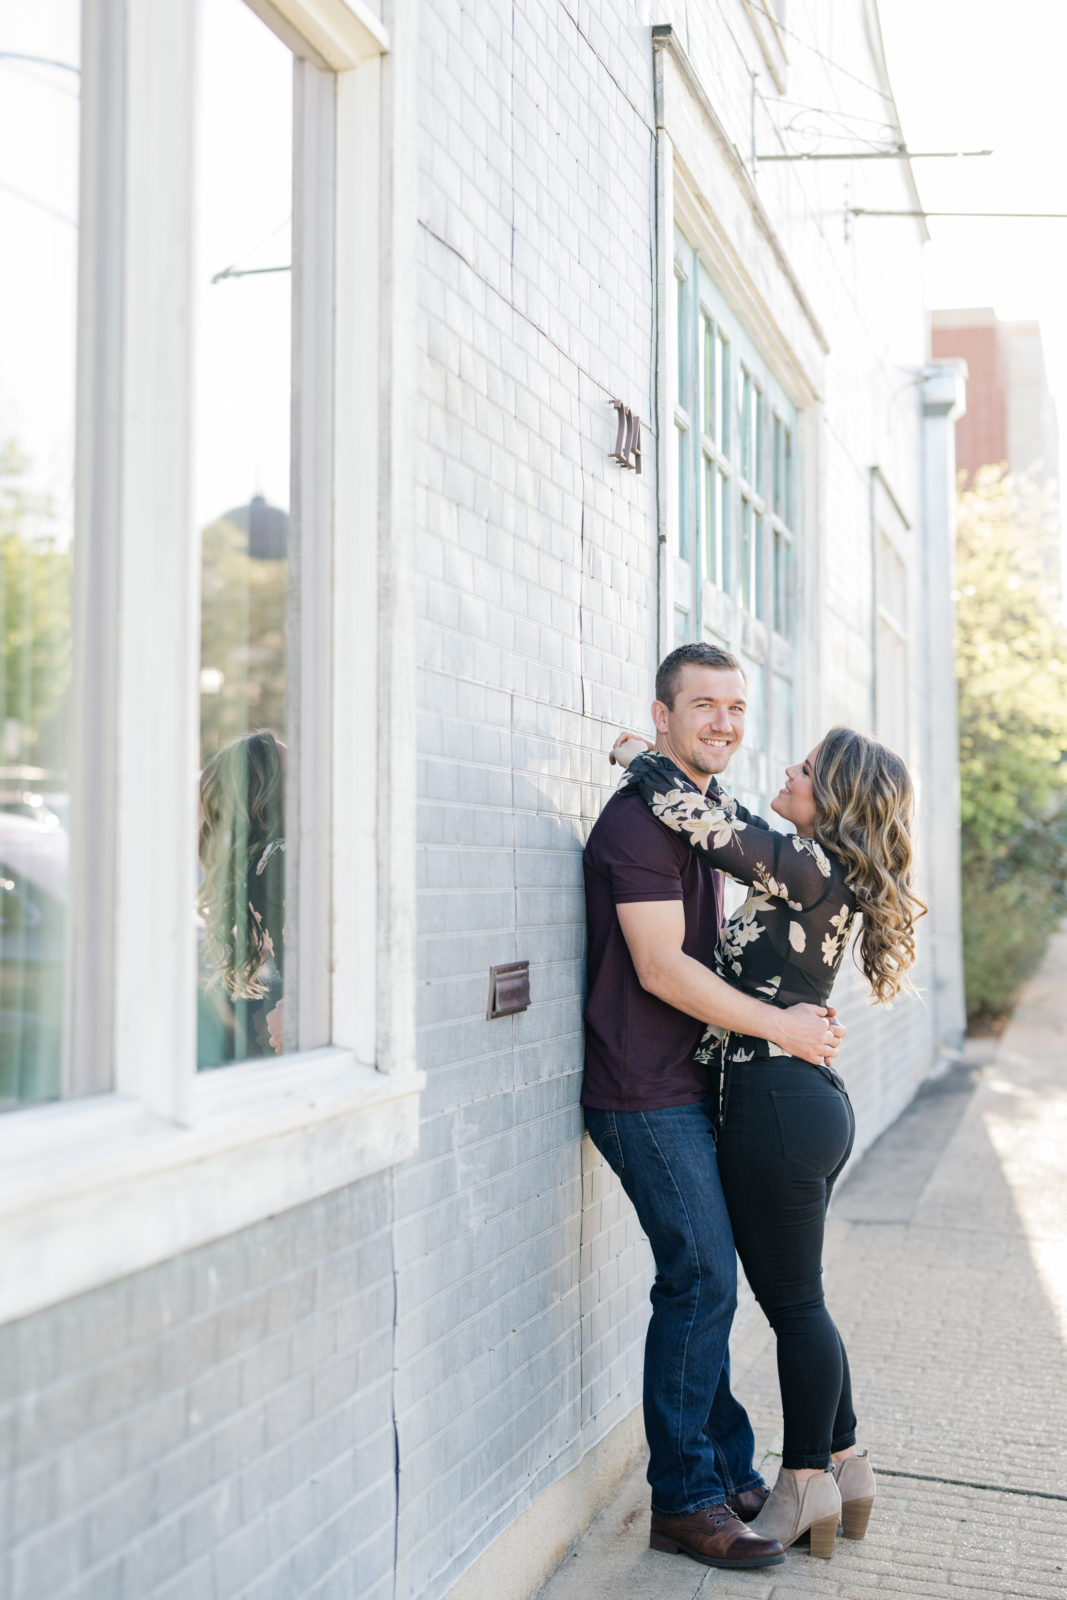 Best Georgetown Texas Engagement Photo Locations Union on Eighth